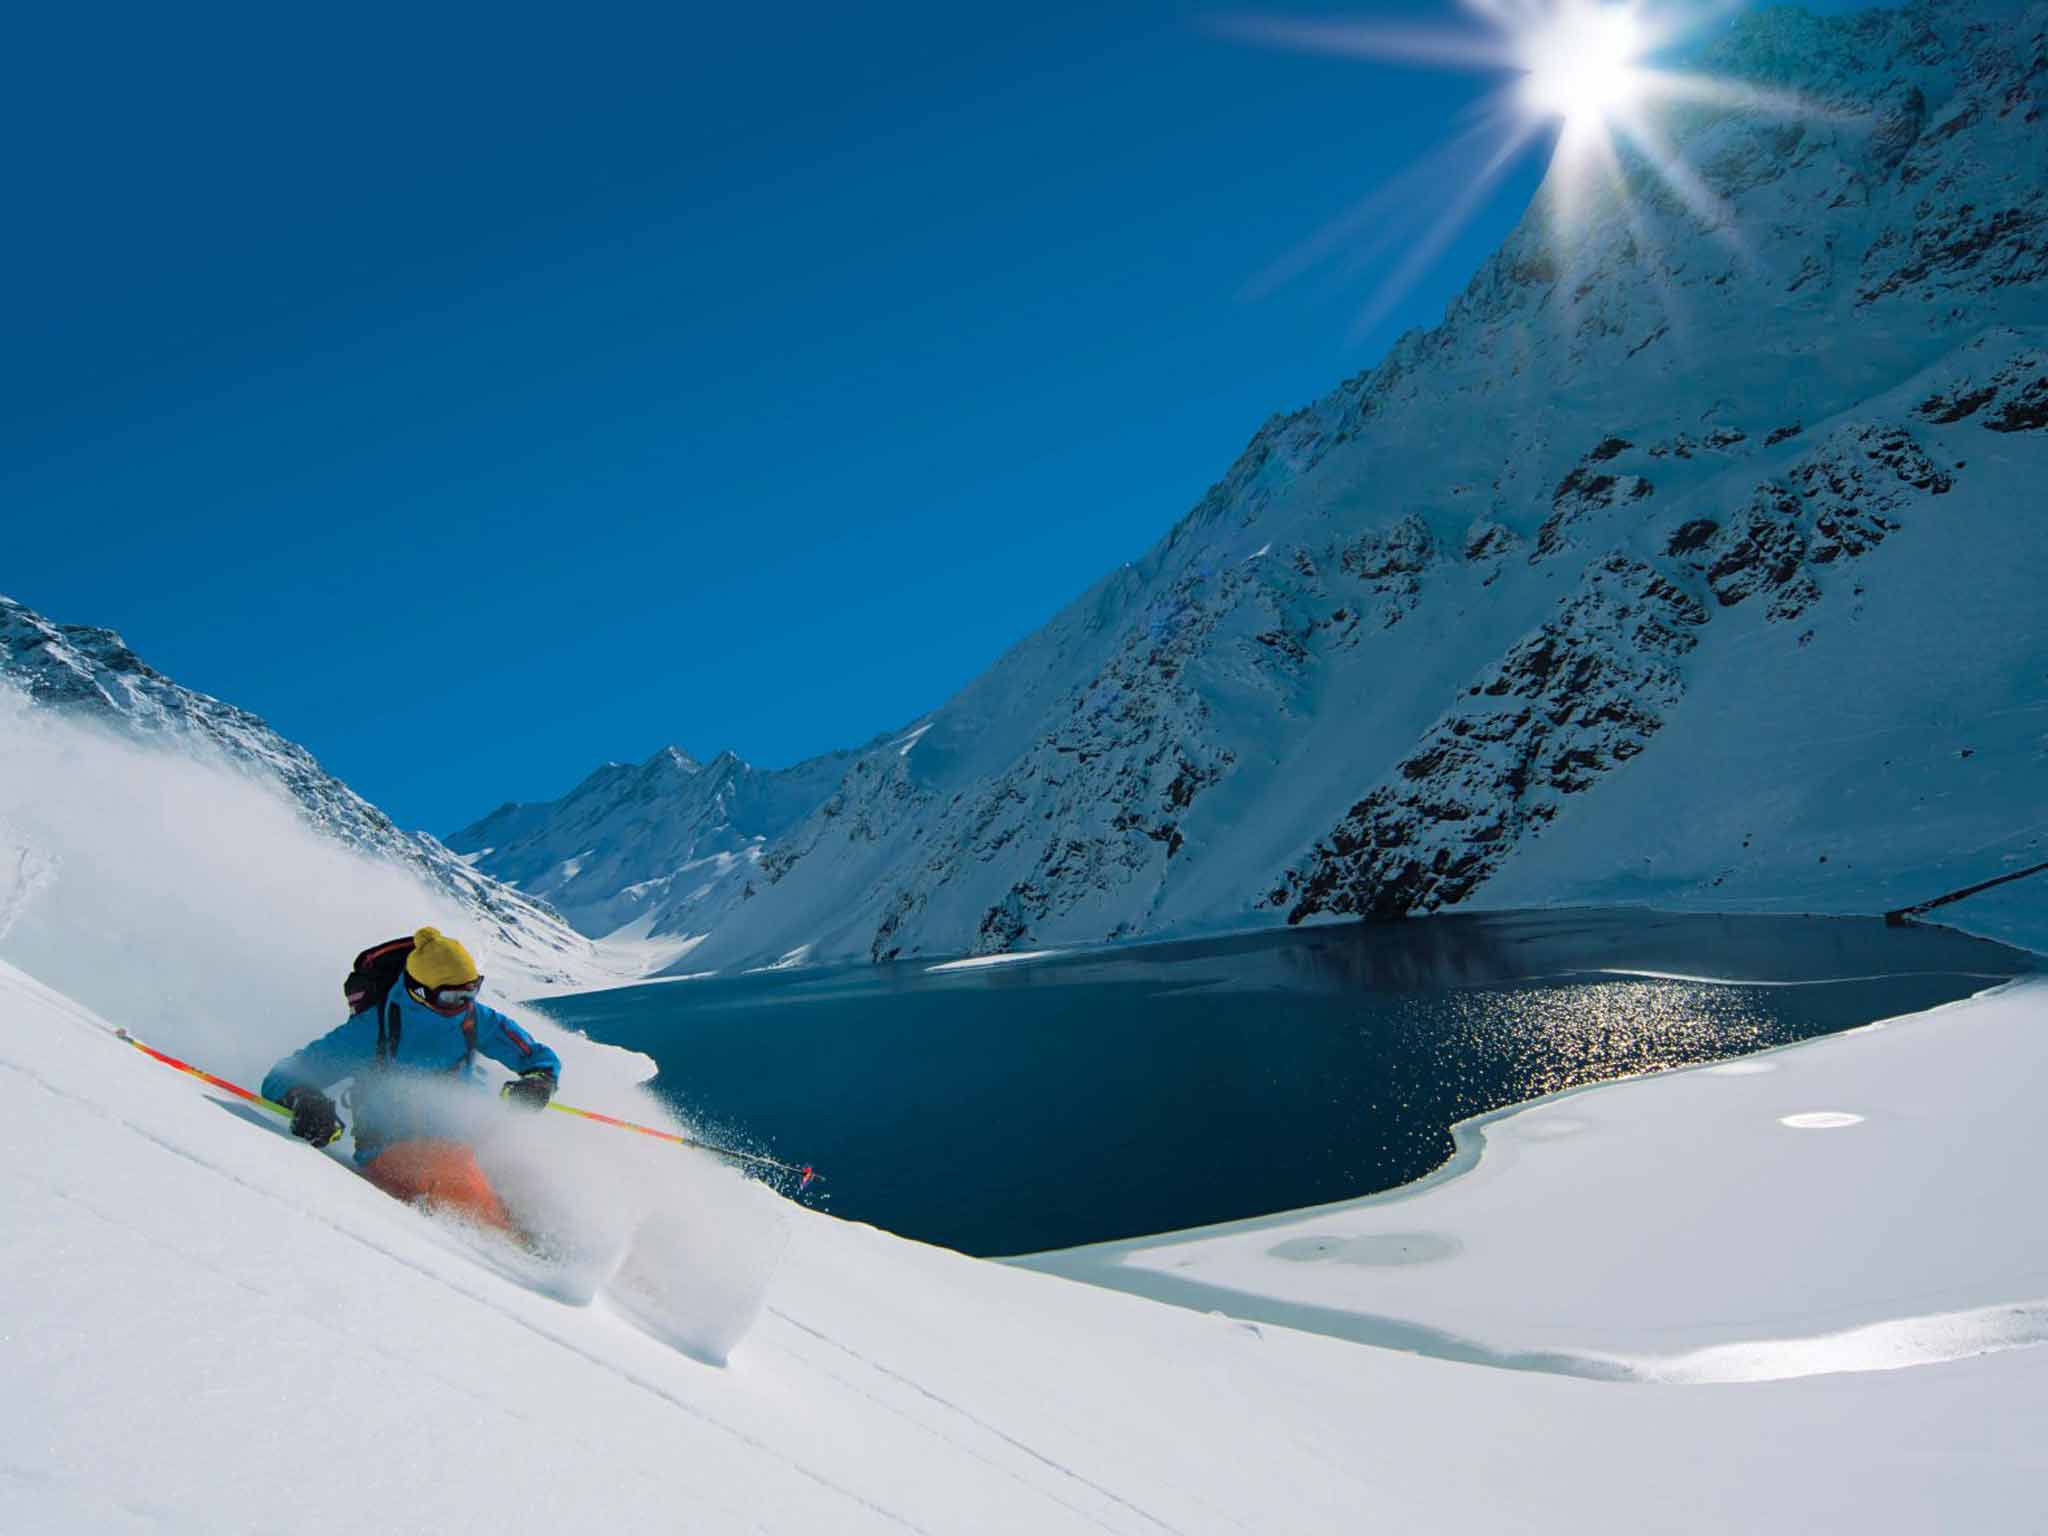 The sun-drenched, untouched trails of Portillo, Chile